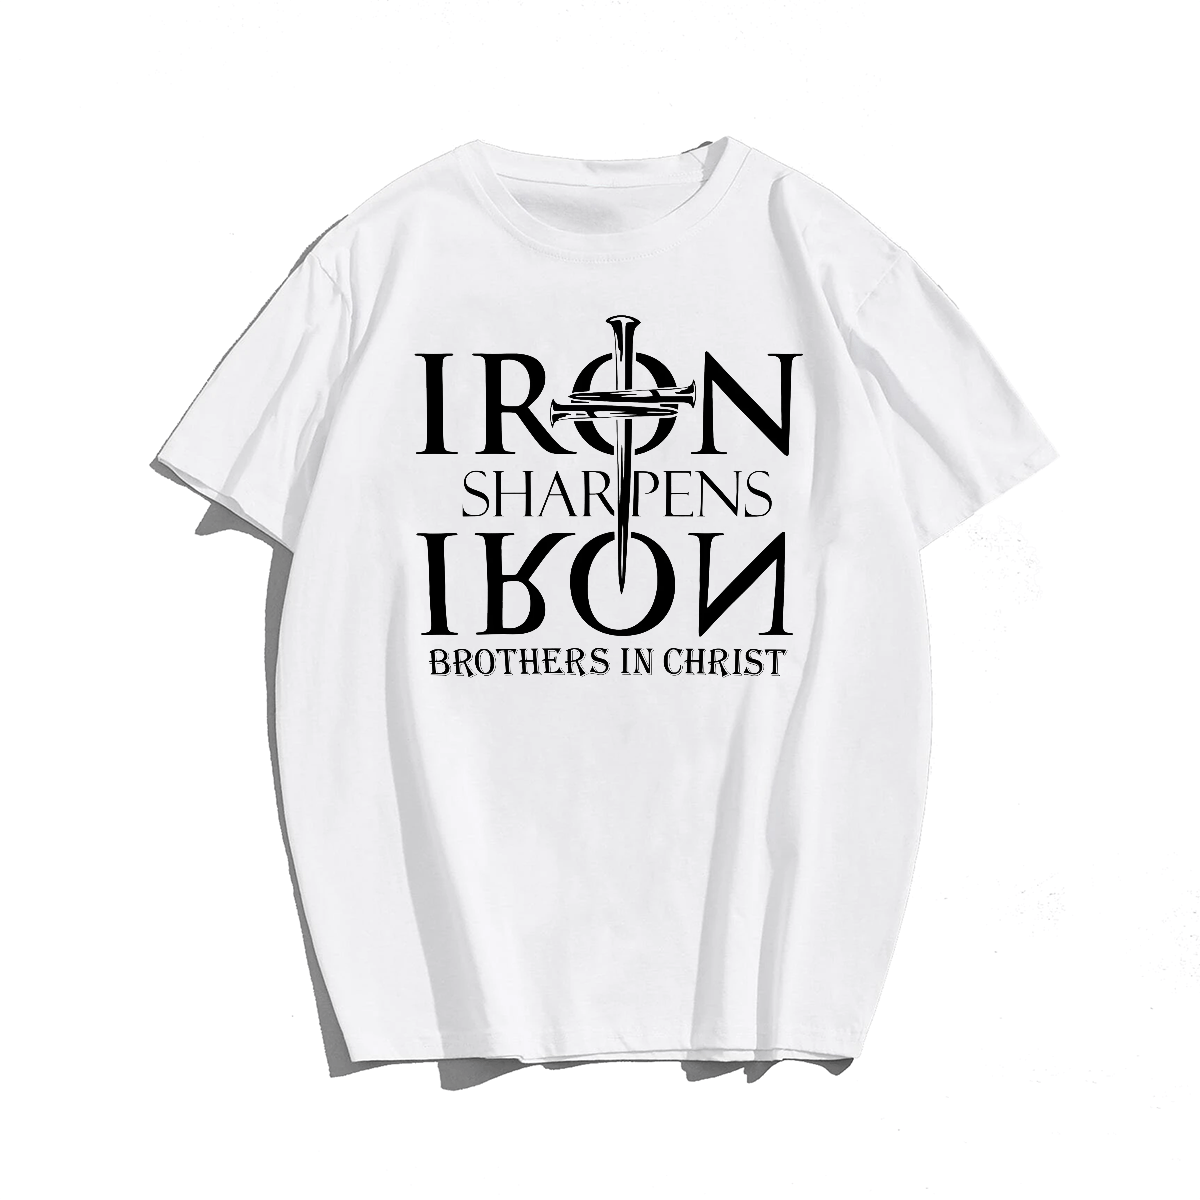 Iron Sharpens Iron Brothers In Christ Plus Size Oversize T-shirt for Big & Tall Man